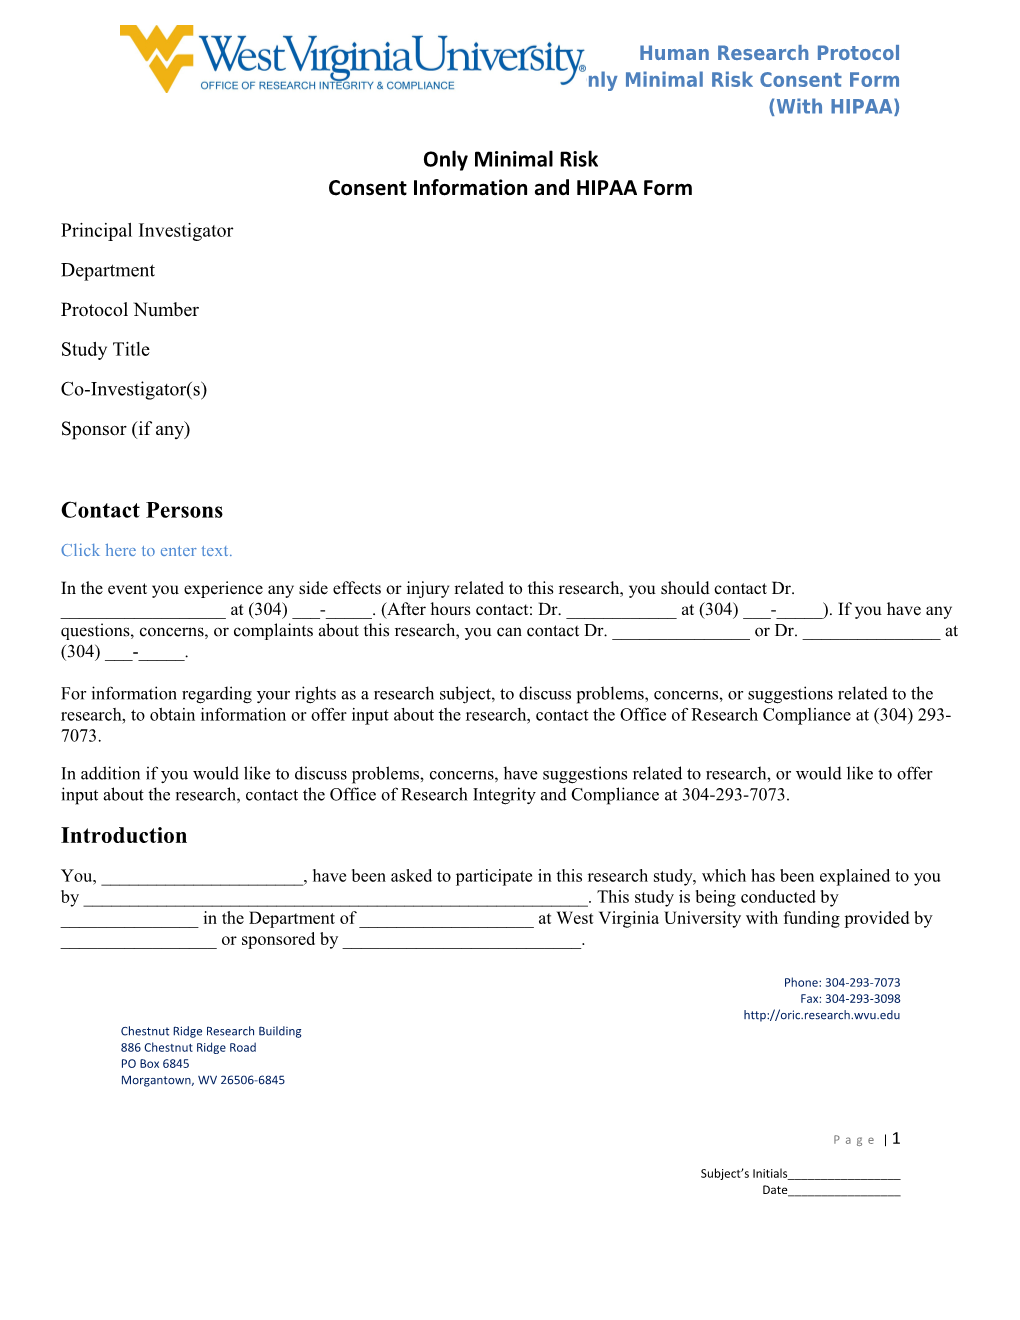 Human Research Protocolonly Minimal Risk Consent Form(With HIPAA)